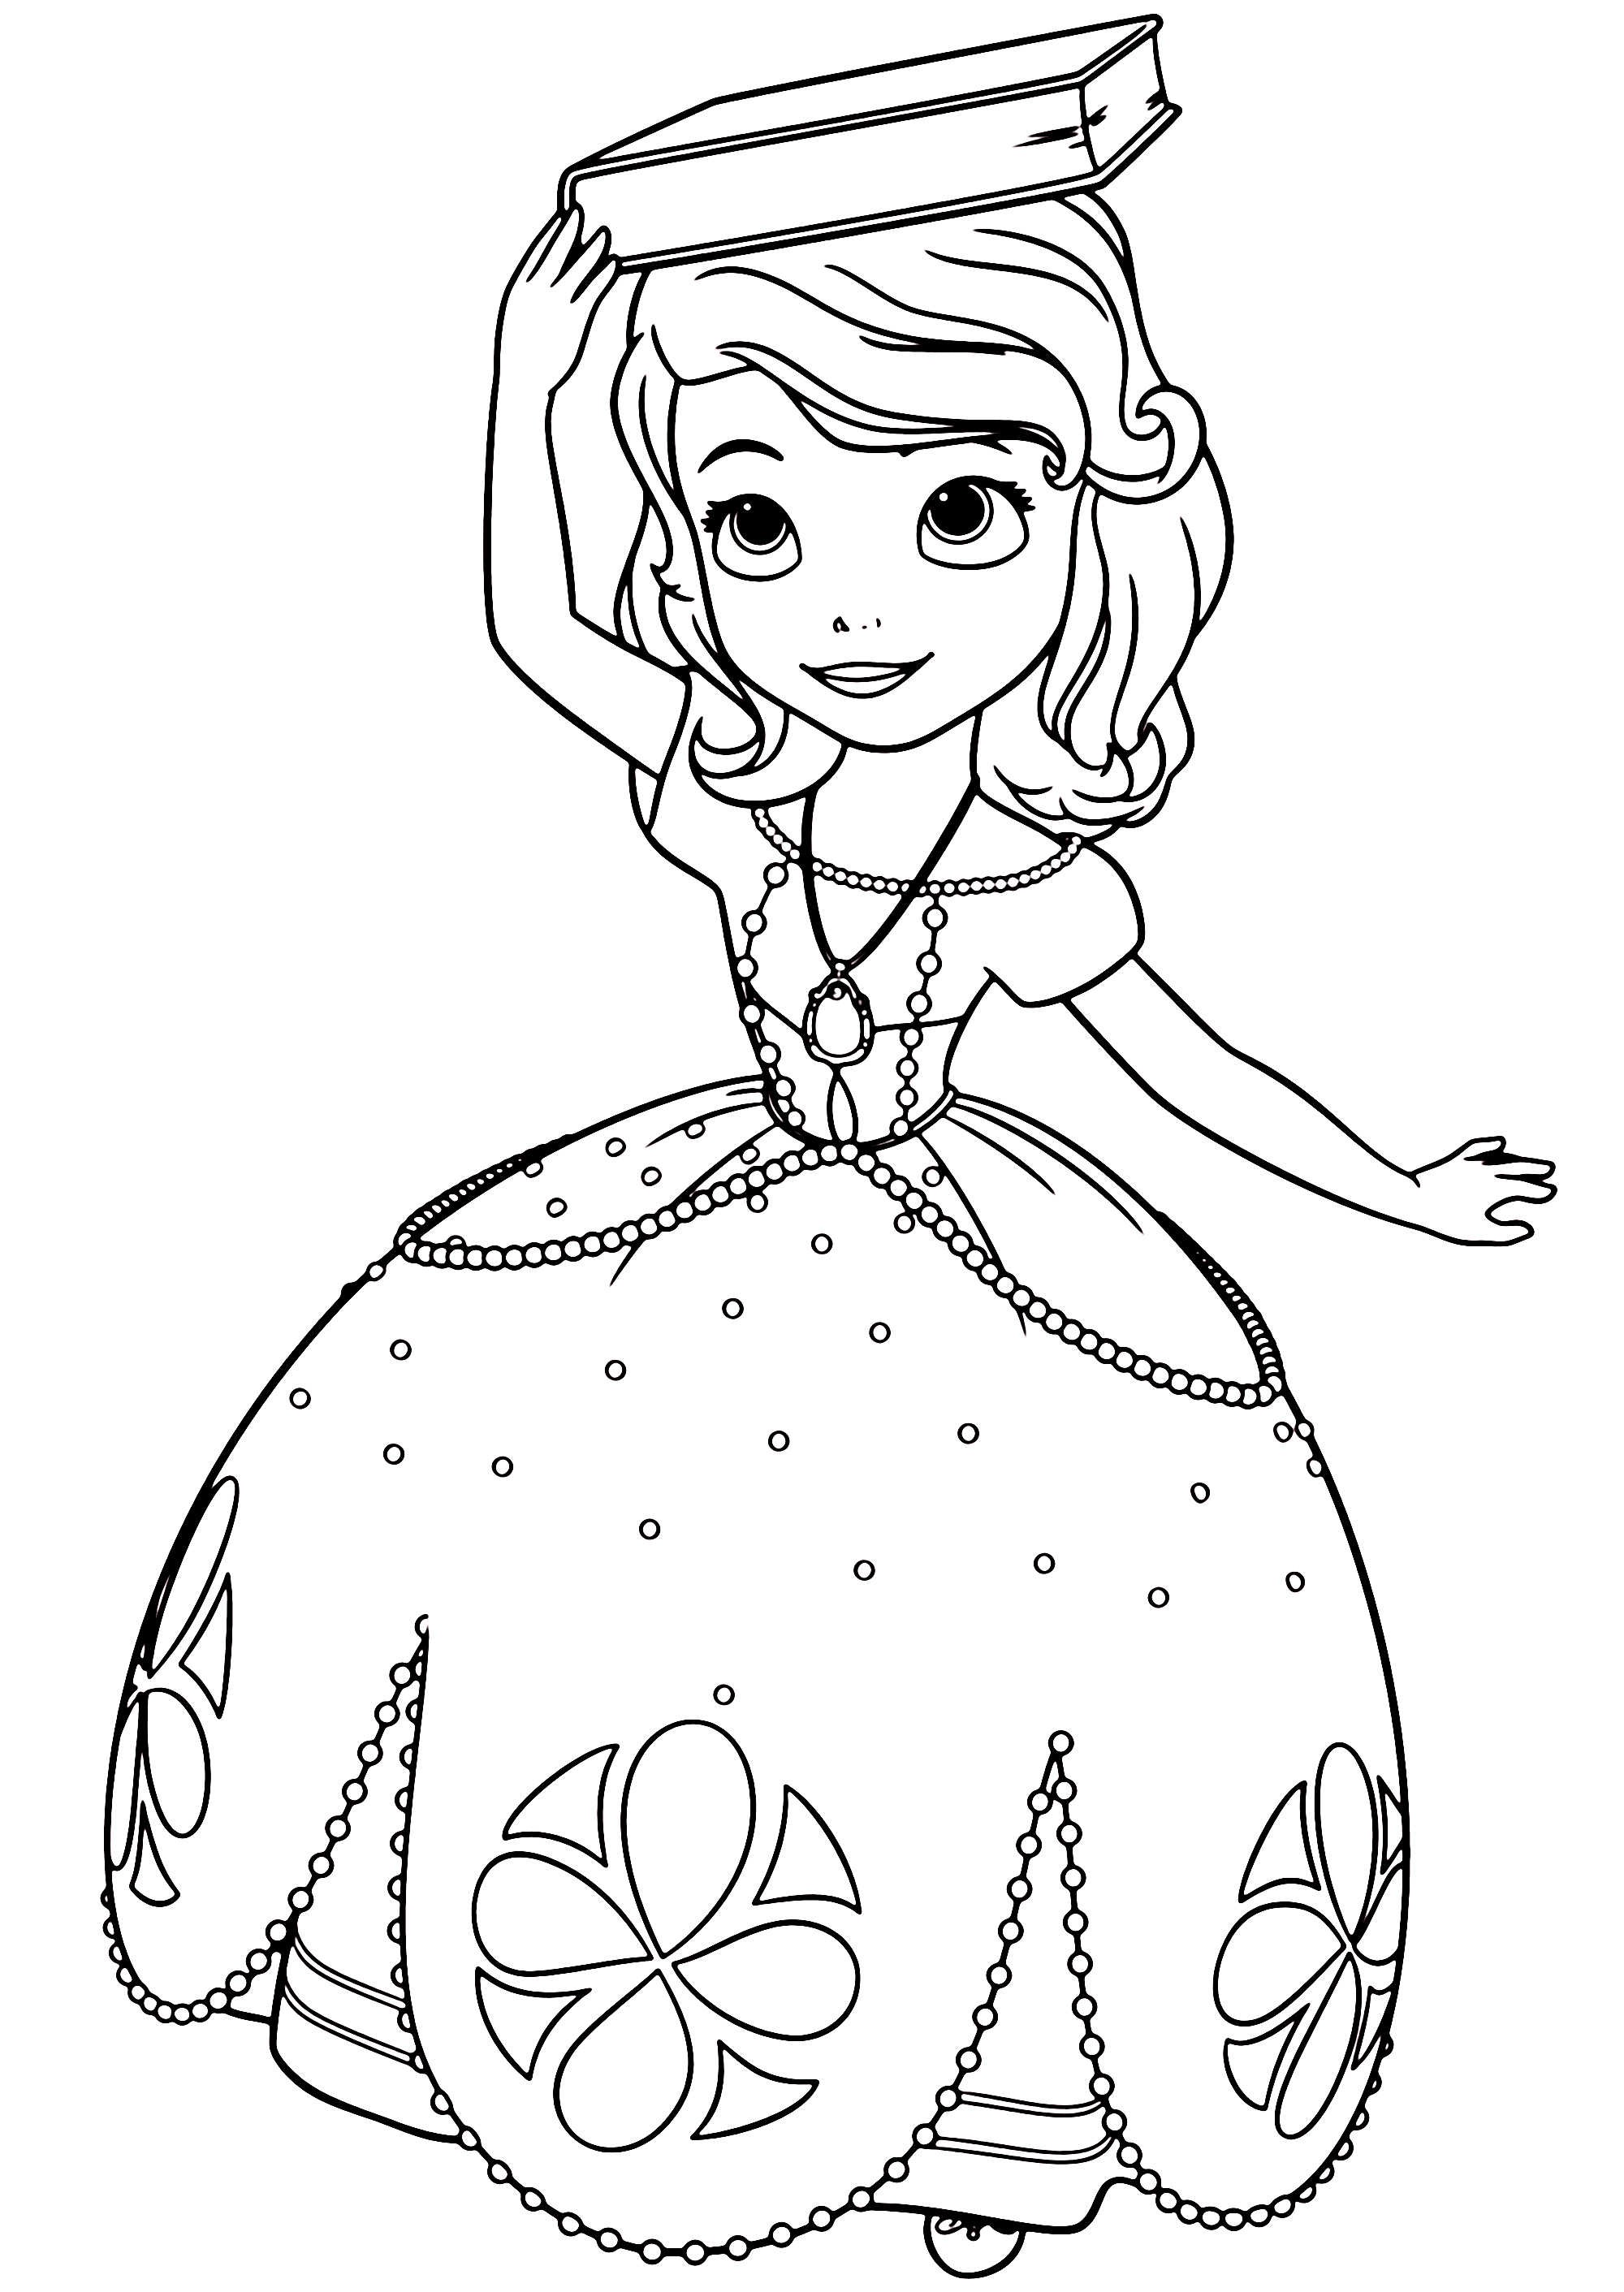 Printable Sofia The First Coloring Pages » Print Color Craft